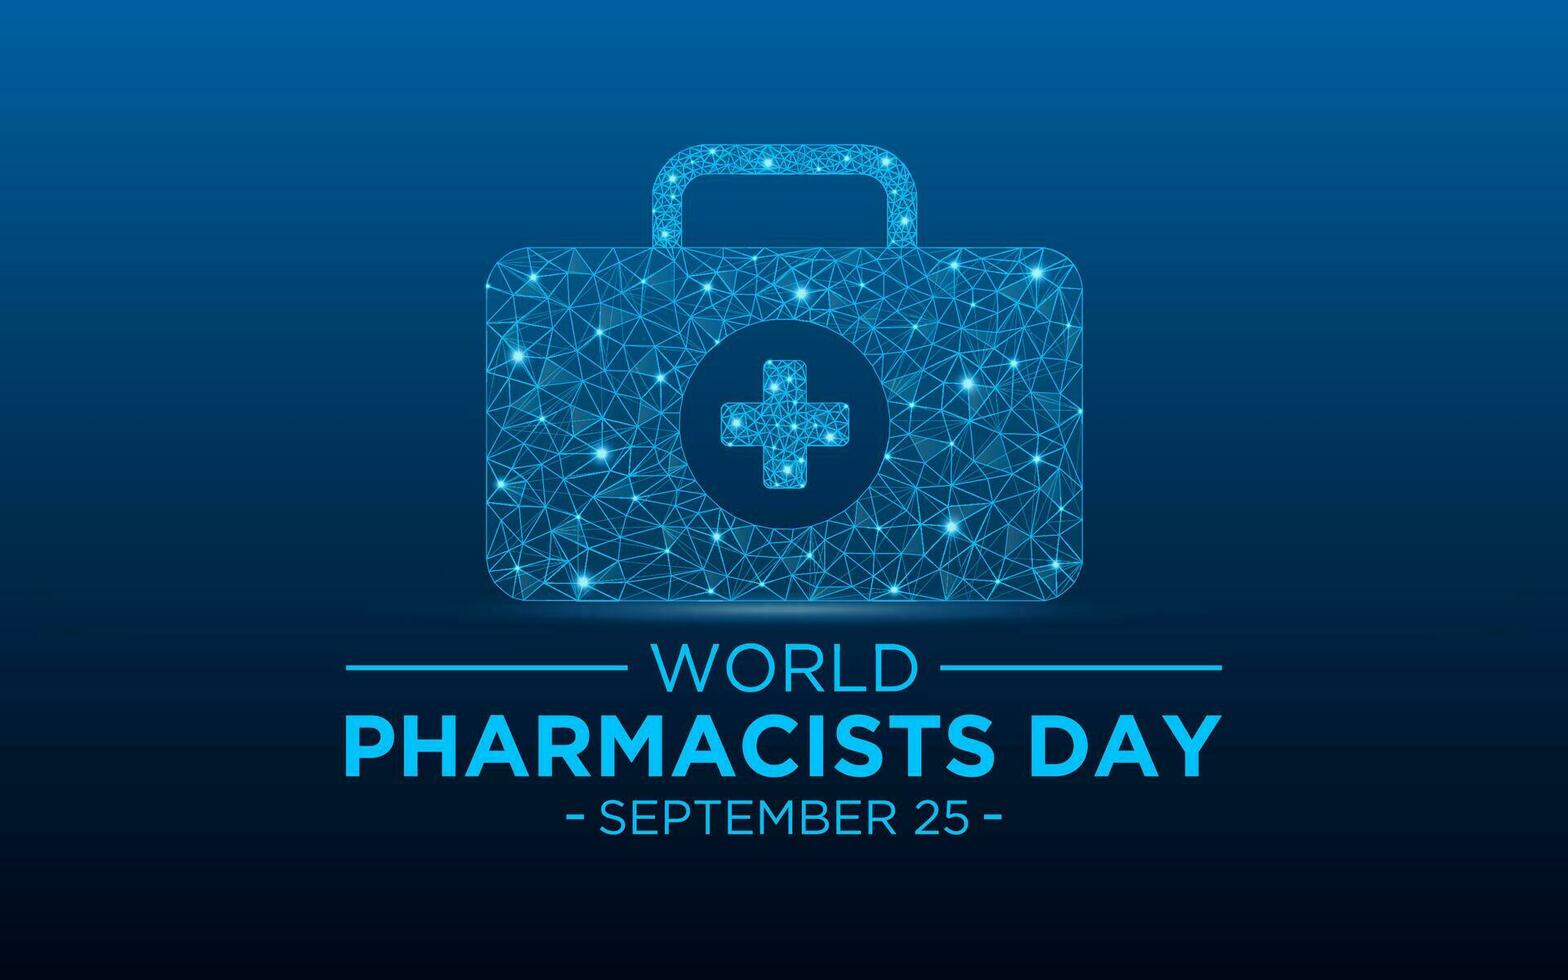 World pharmacists day on september 25 is a celebration of every pharmacist, pharmaceutical scientist. Low poly style design. Geometric background. Isolated vector illustration.